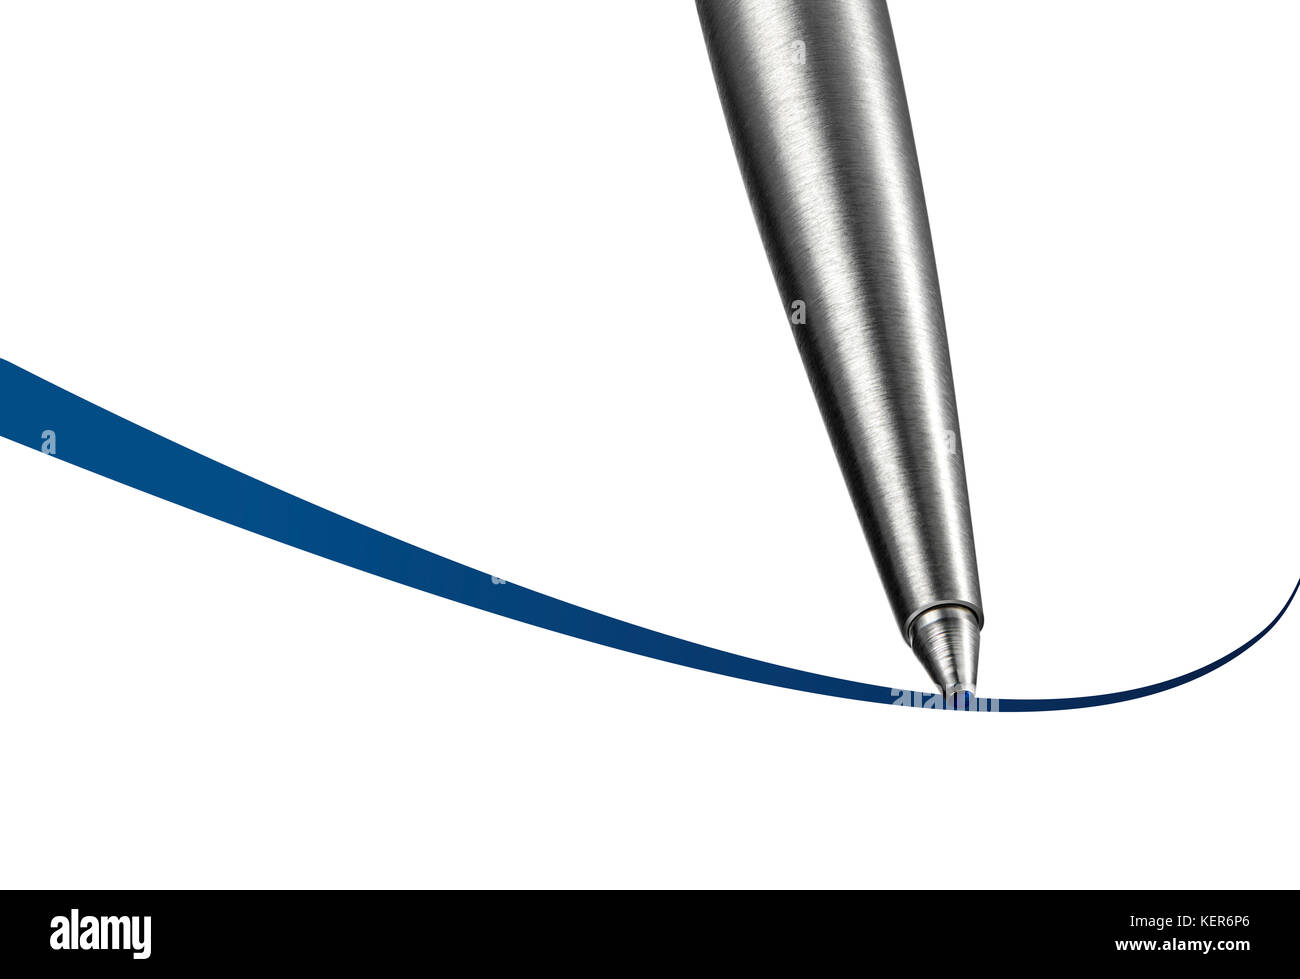 Conceptual photo illustration of ball point pen close up as it traces an ink line Stock Photo